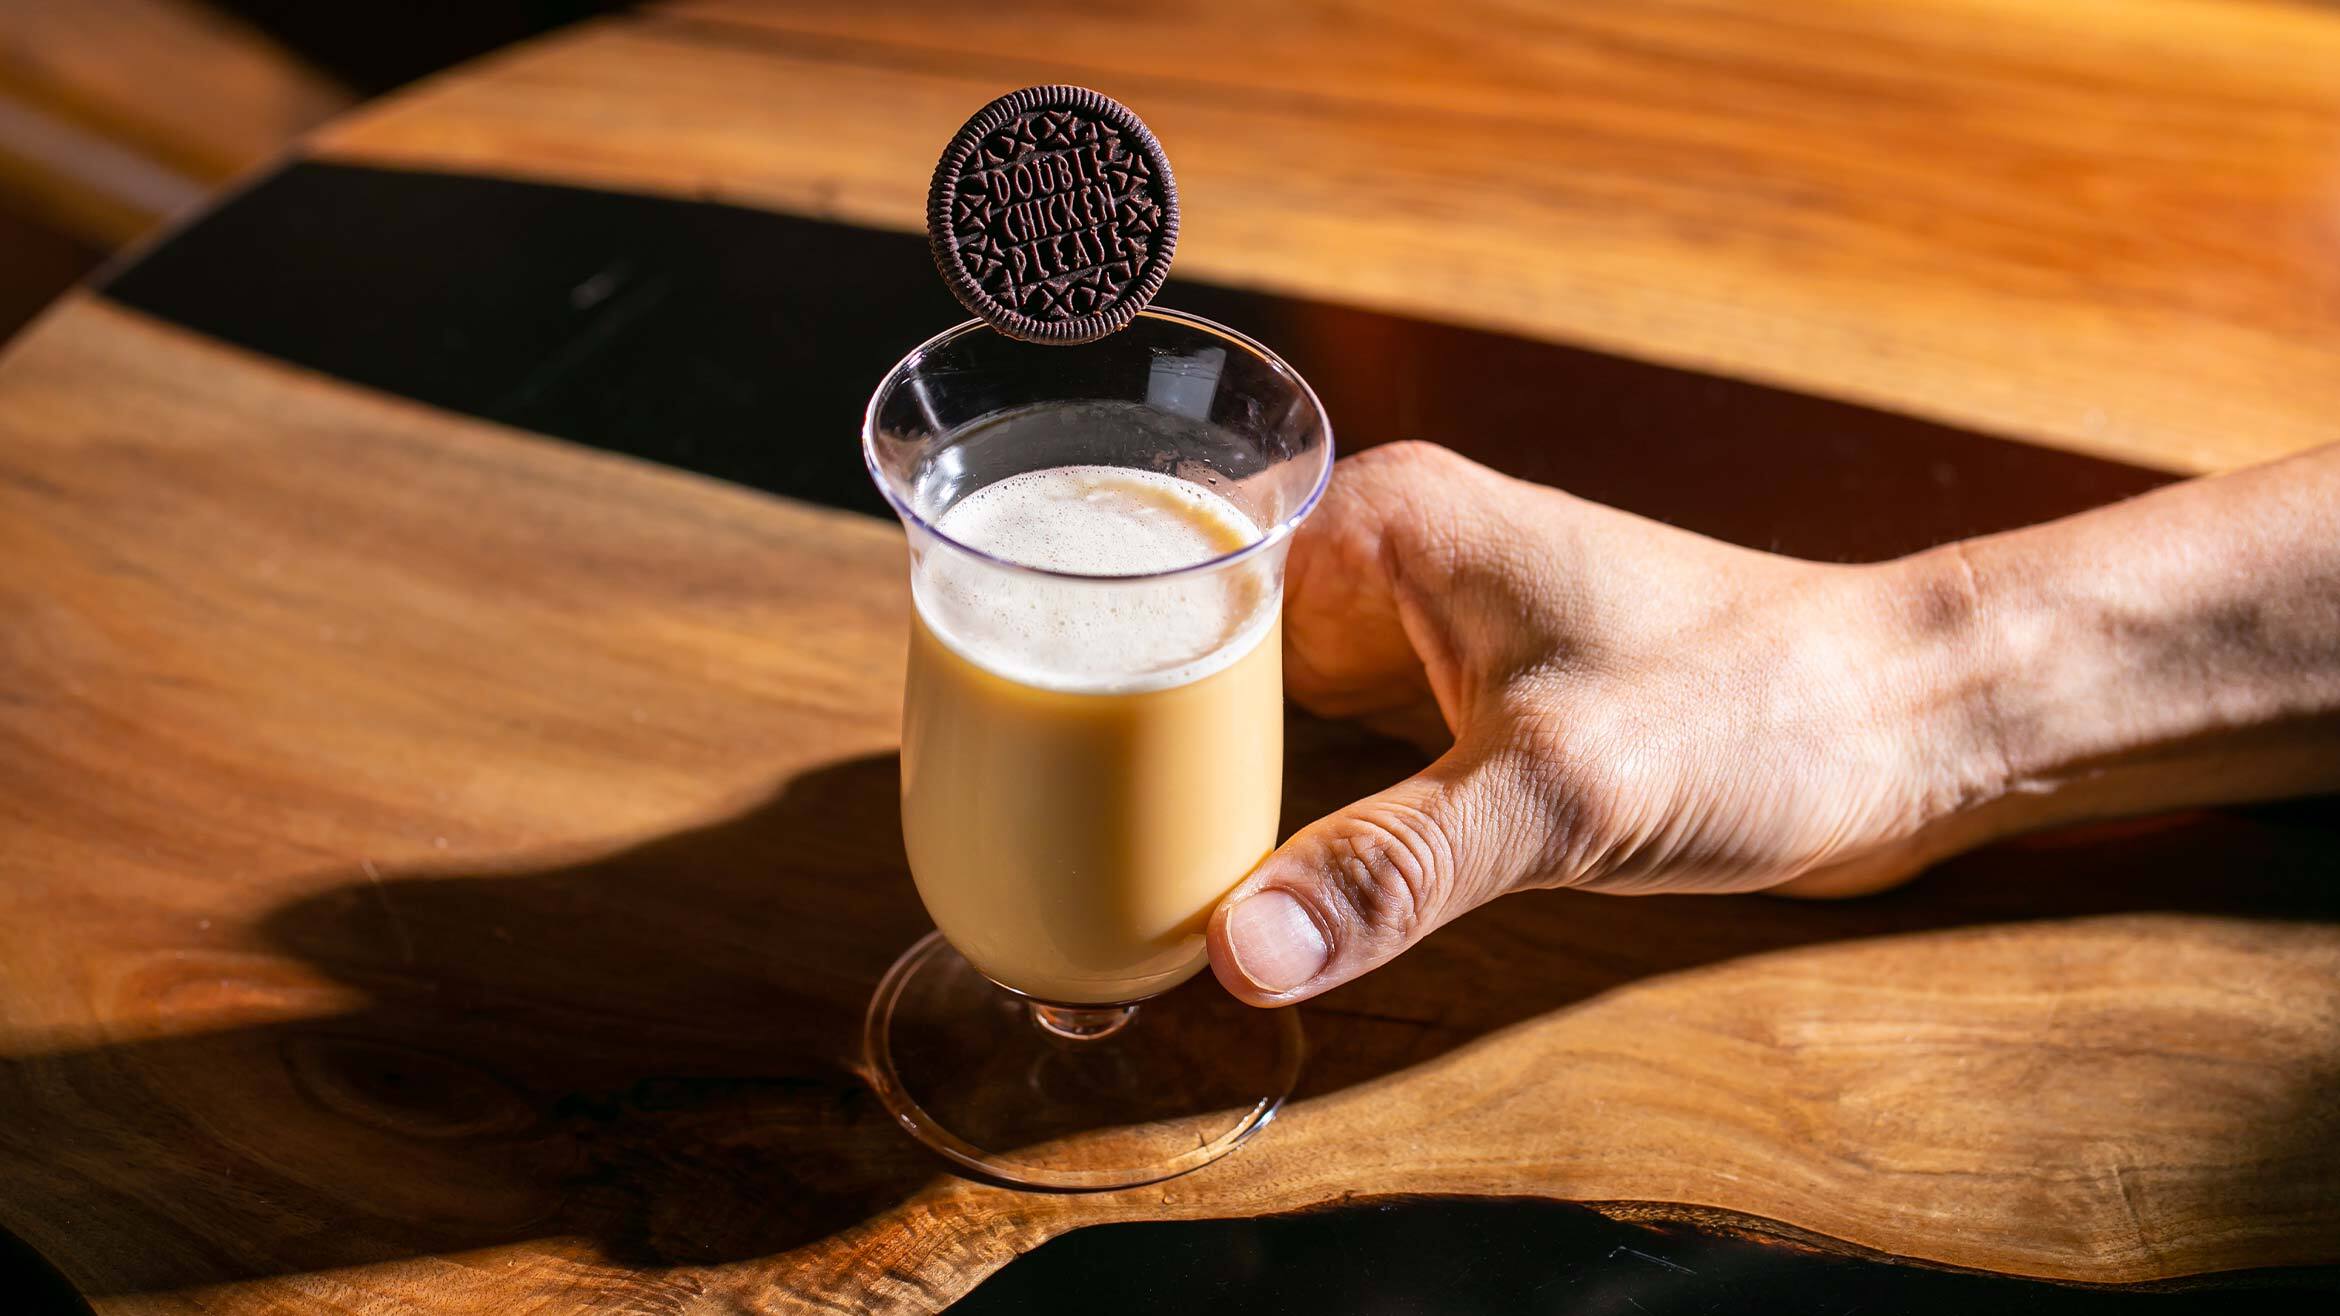 A milky cocktail garnished with an Oreo